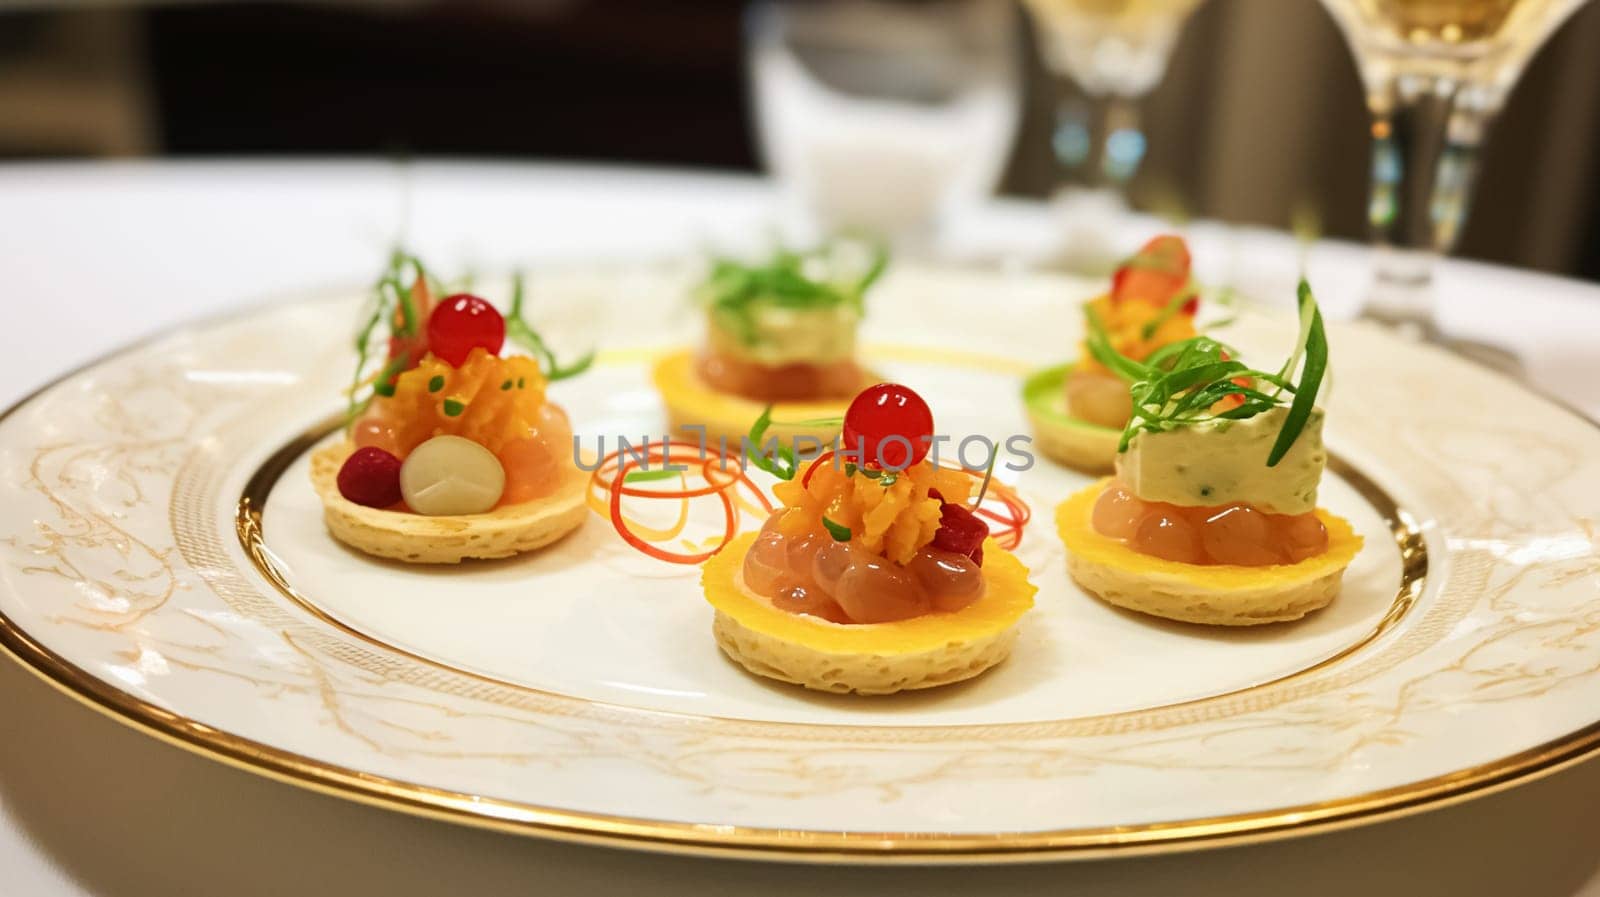 Food, hospitality and room service, starter appetisers as exquisite cuisine in hotel restaurant a la carte menu, culinary art and fine dining experience